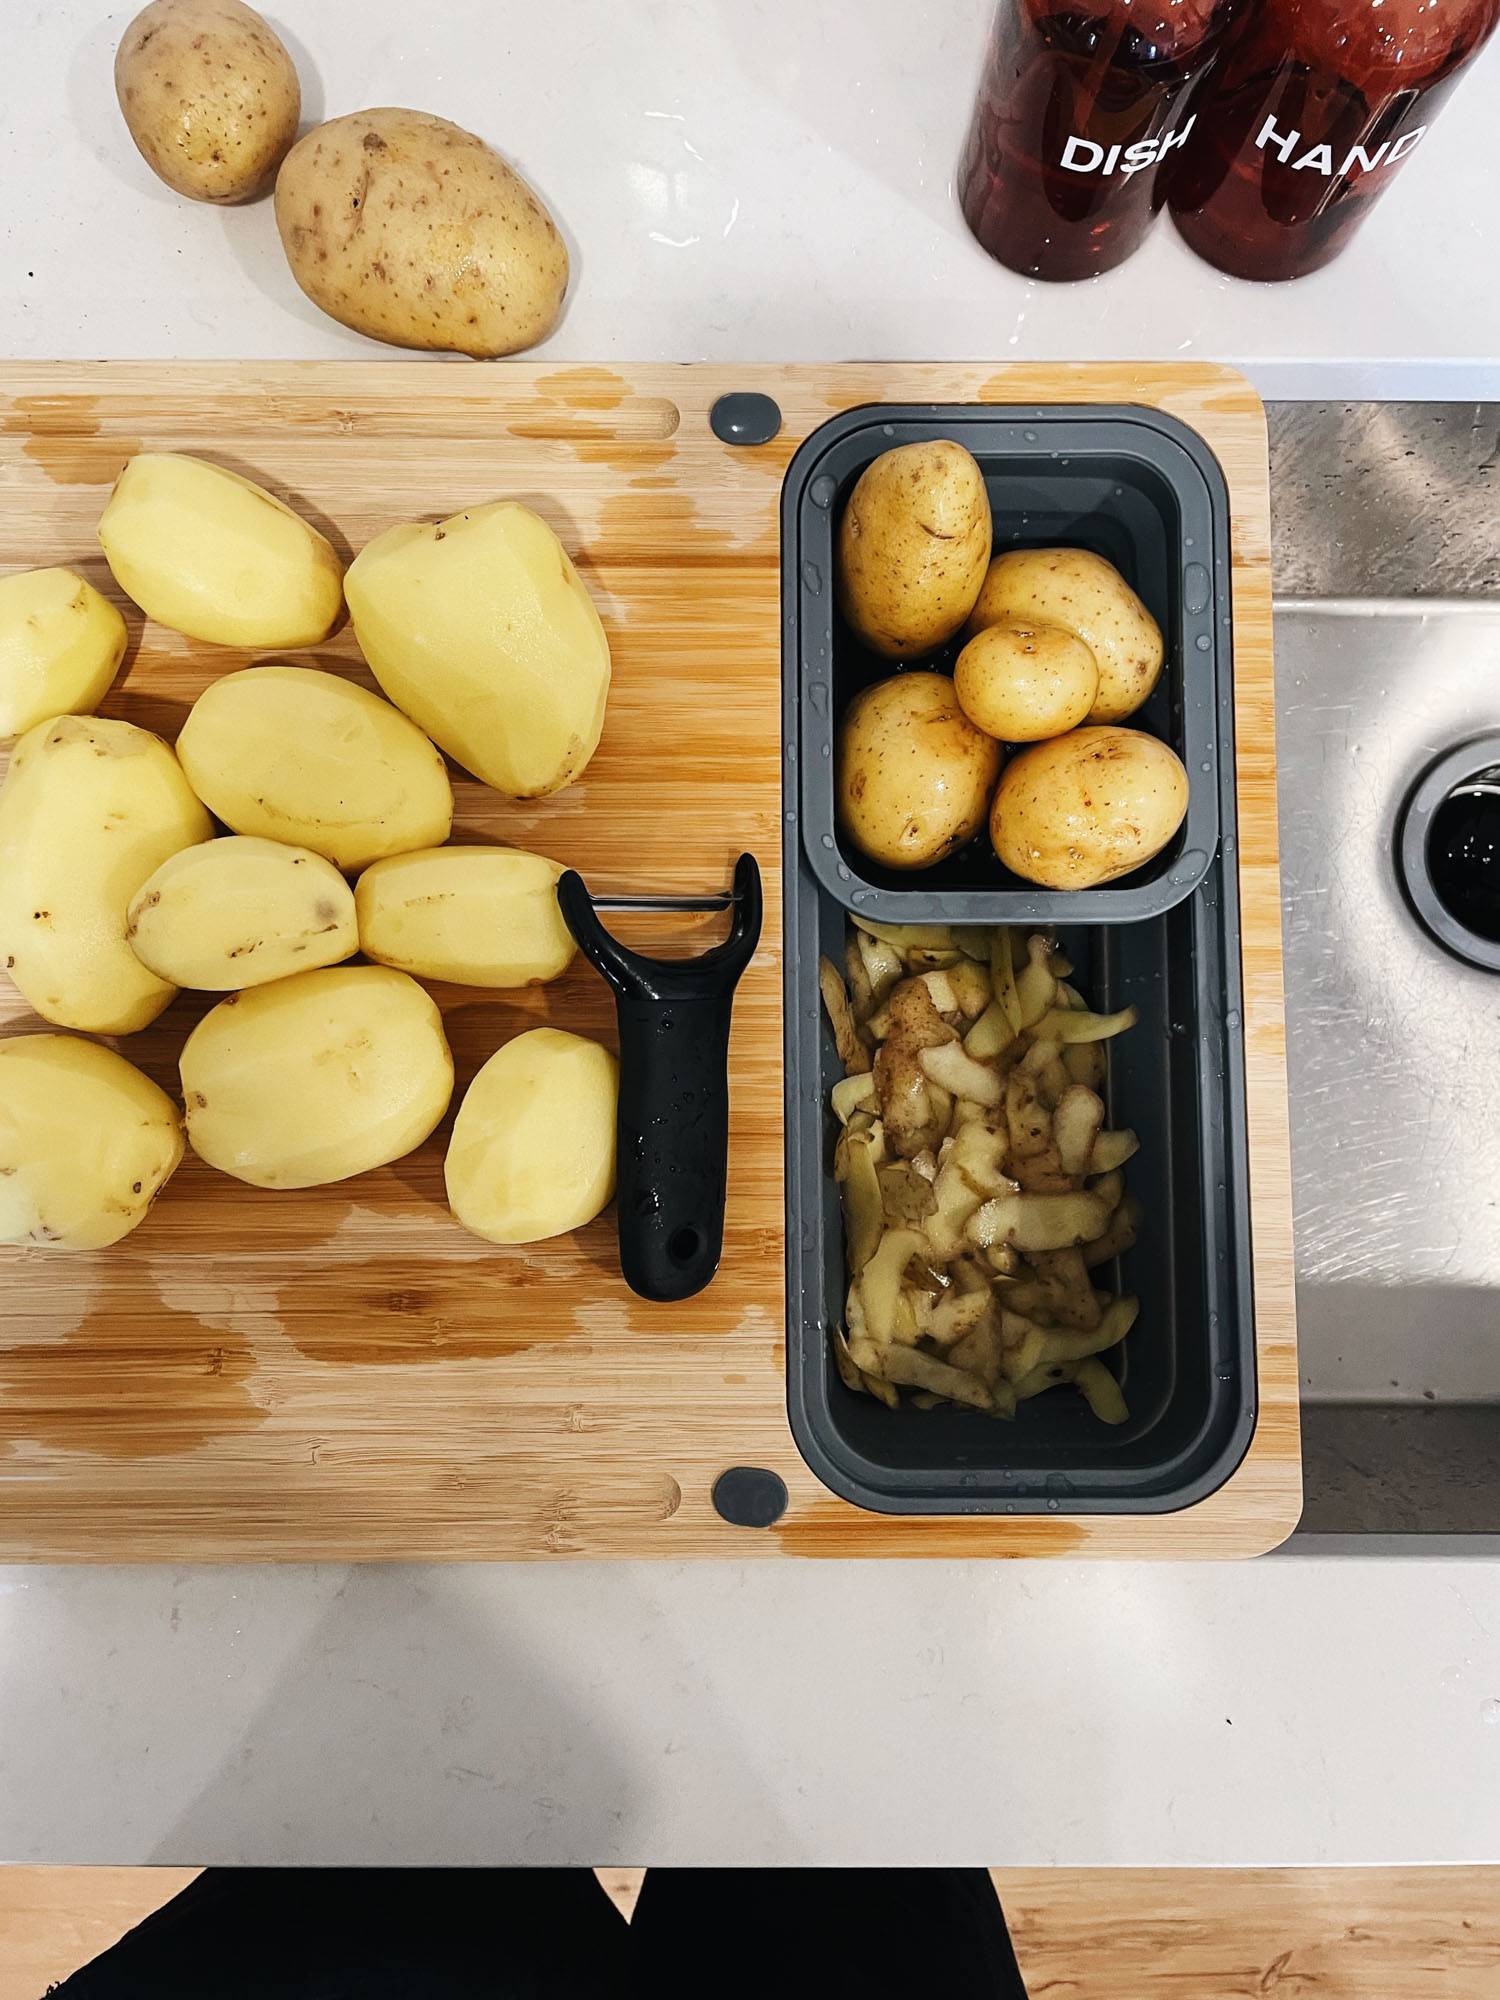 A cutting board with potatoes being peeled.